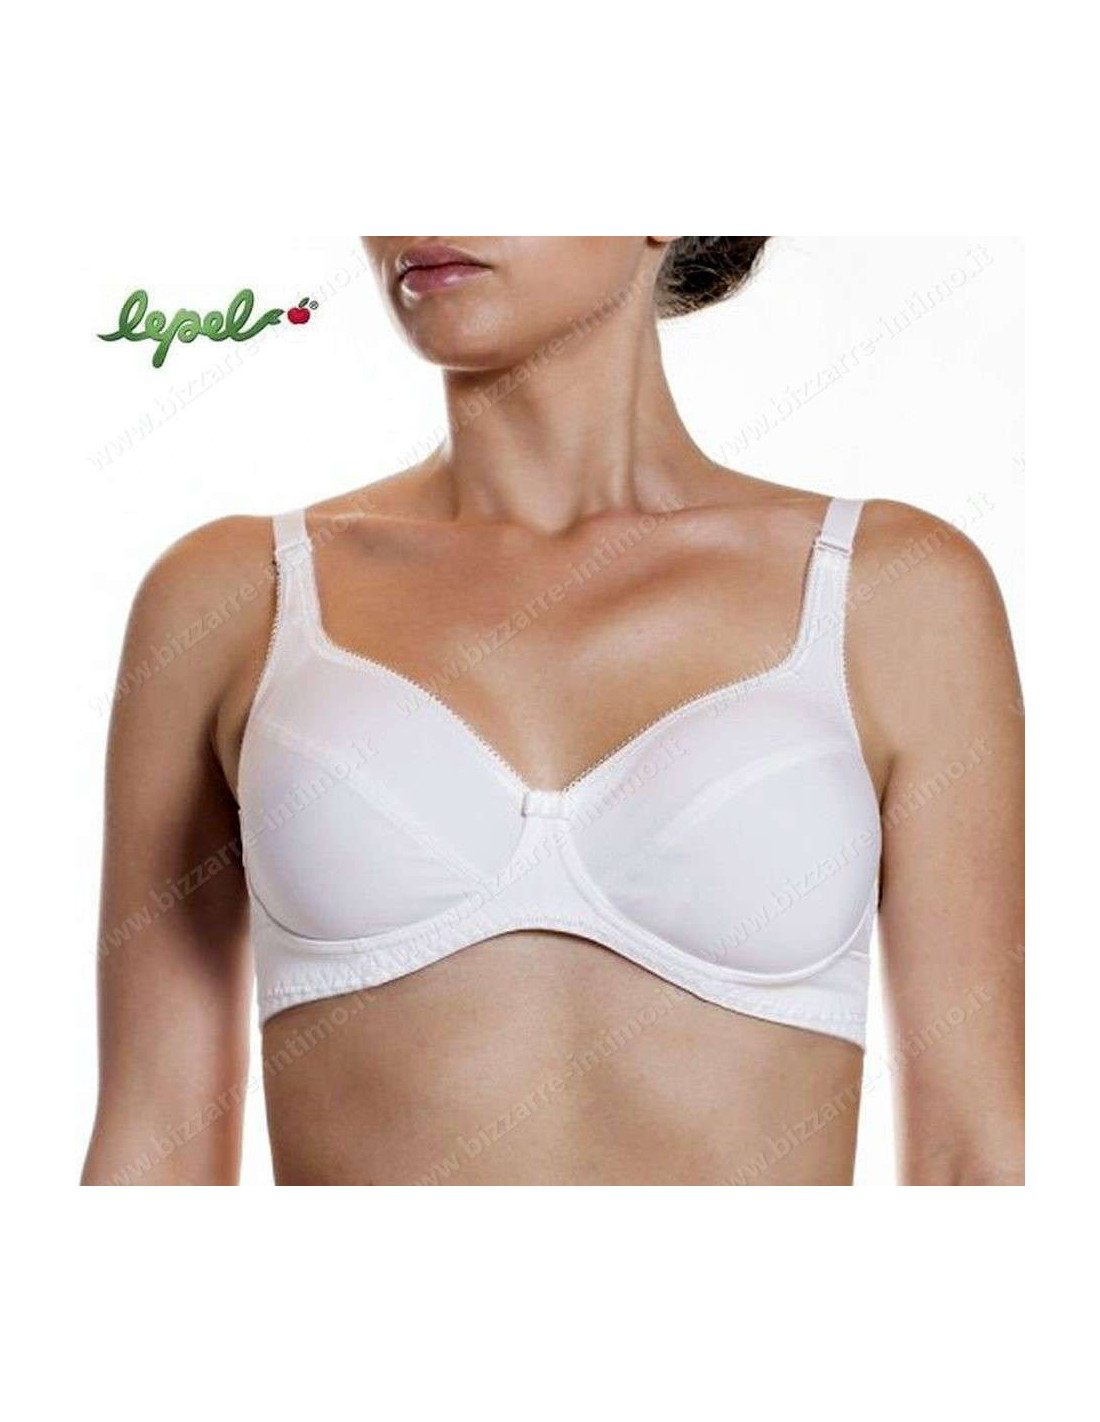 Bra Lepel Belseno art. 650 - Cotton and microfiber unpadded and NOT wired  bra with comfort structure.Comp:70% cotton, 20% polyamide, 10%  elastane.Sizes:2=32 Cup B3=34 Cup B4=36 Cup B5=38 Cup B6=40 Cup B7=42